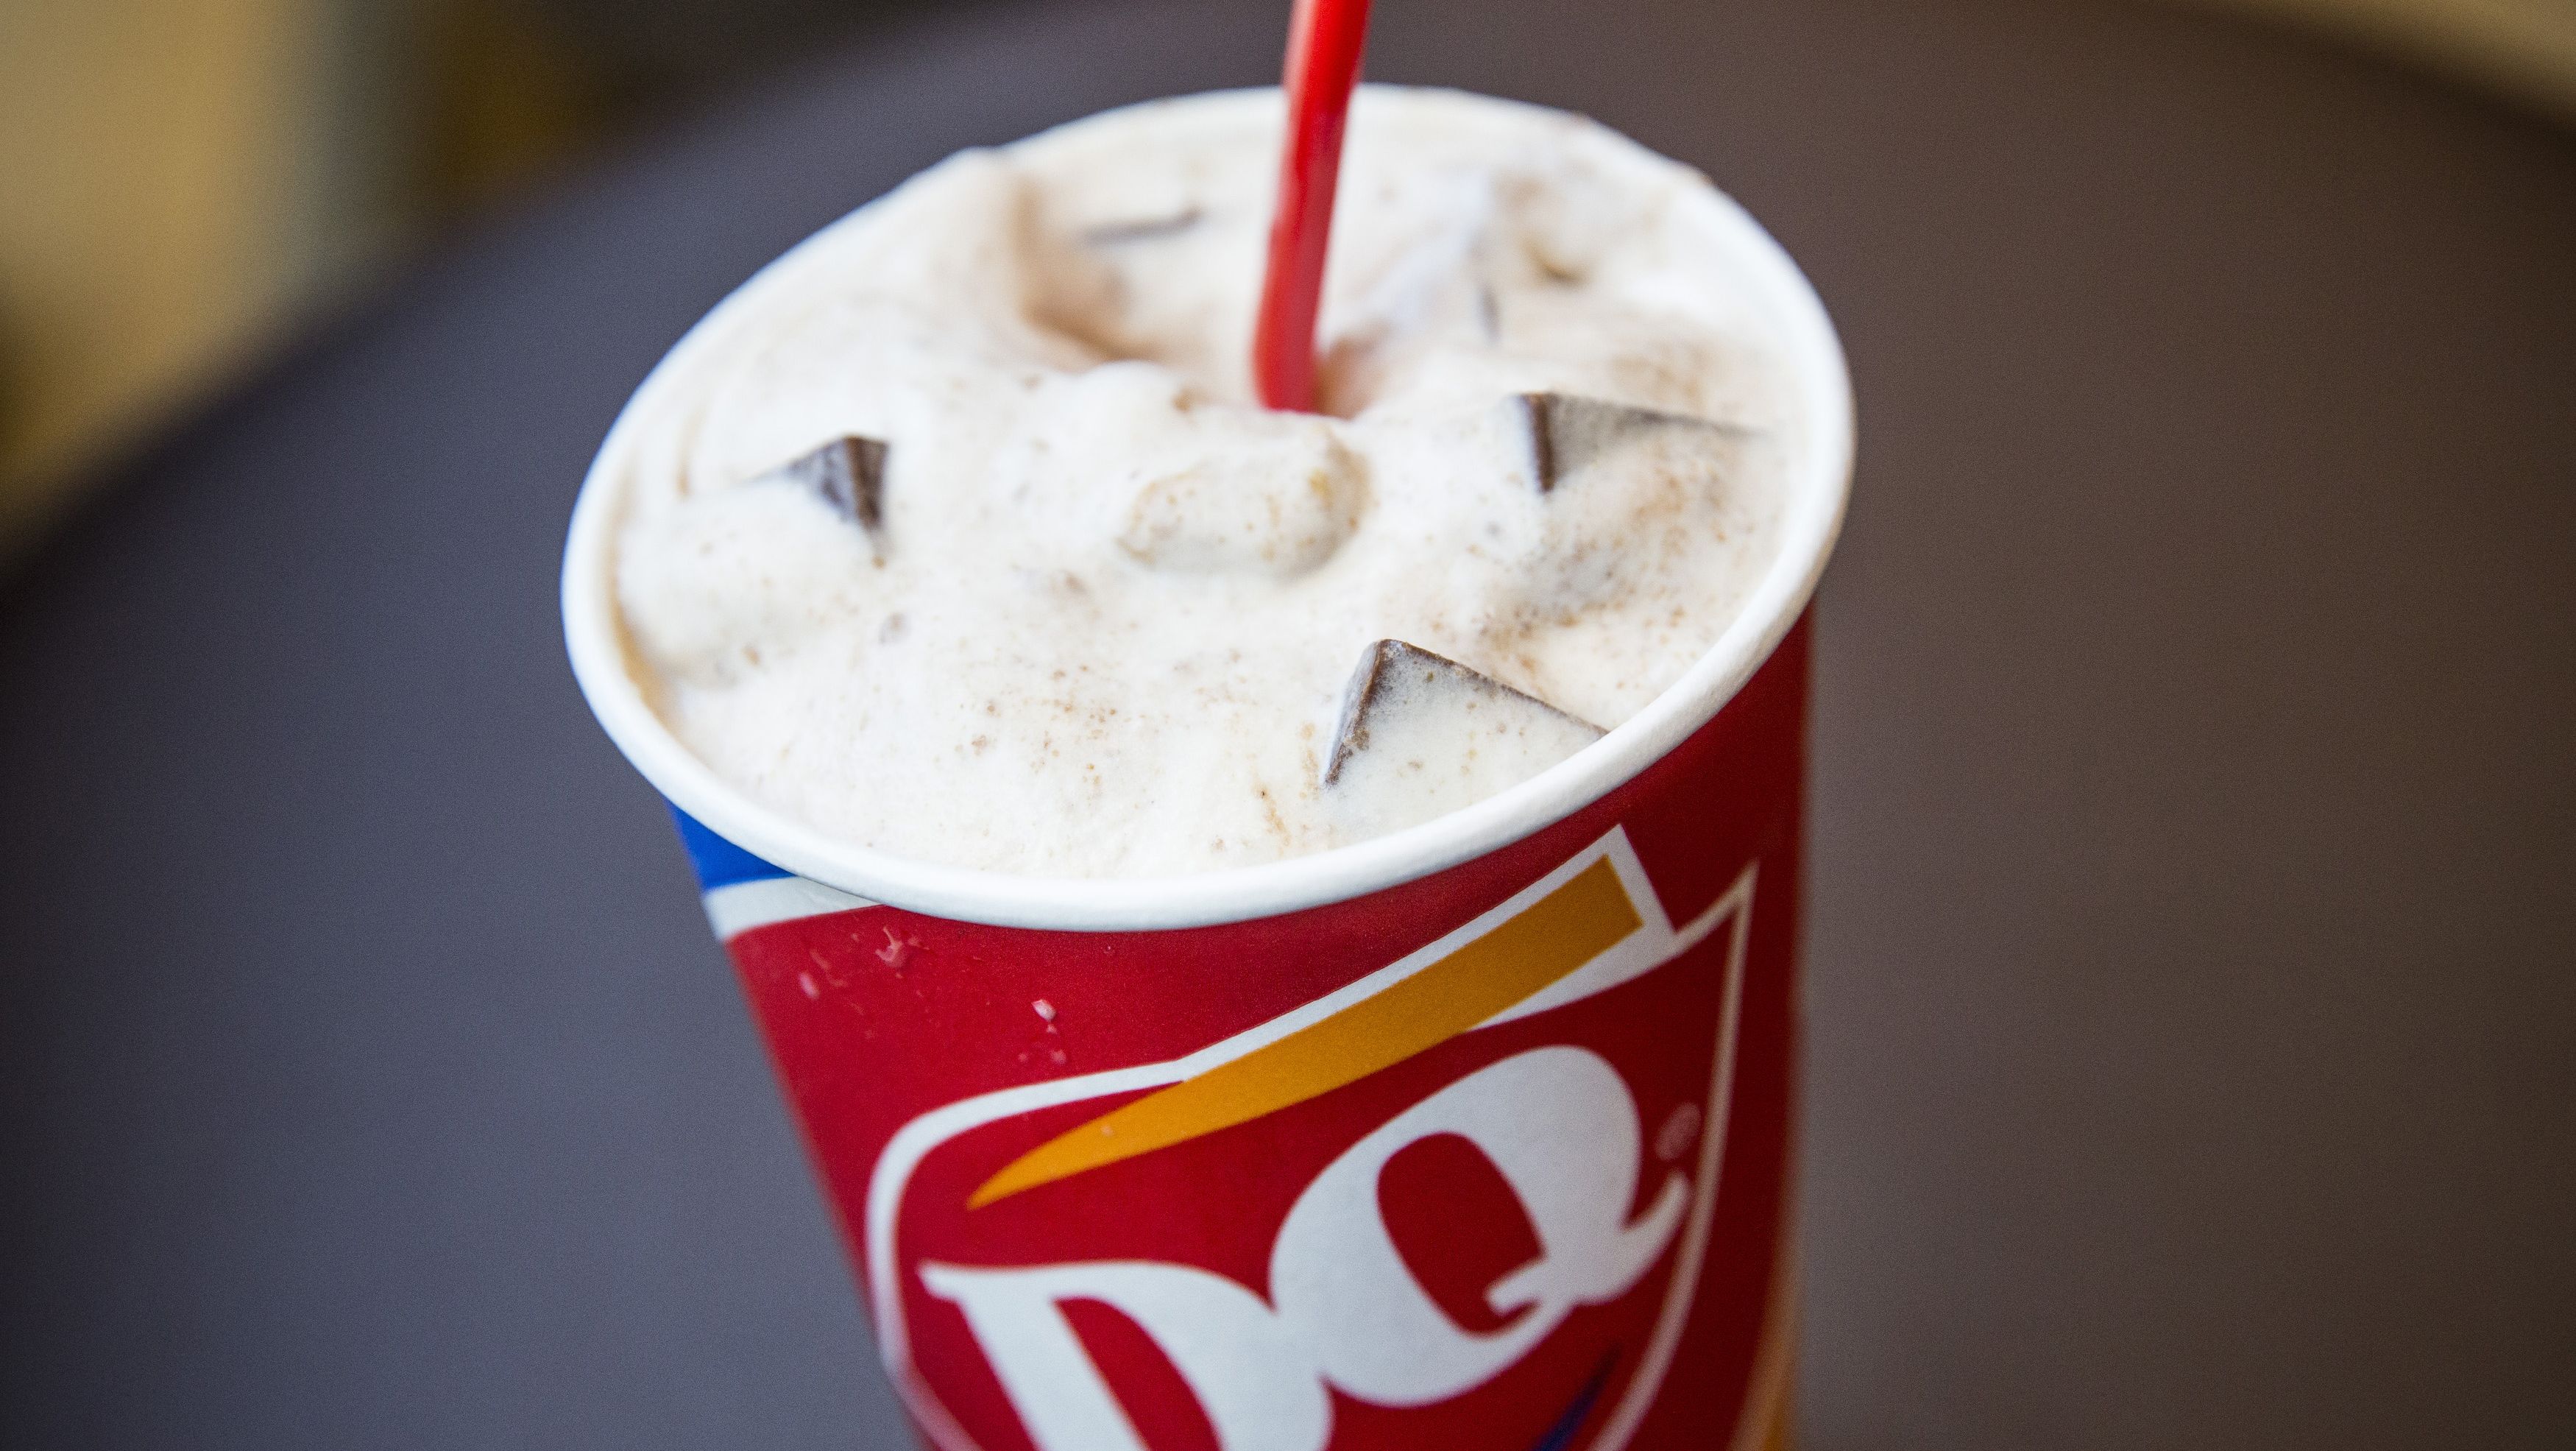 Celebrate the End of Summer With Free Ice Cream From Dairy Queen